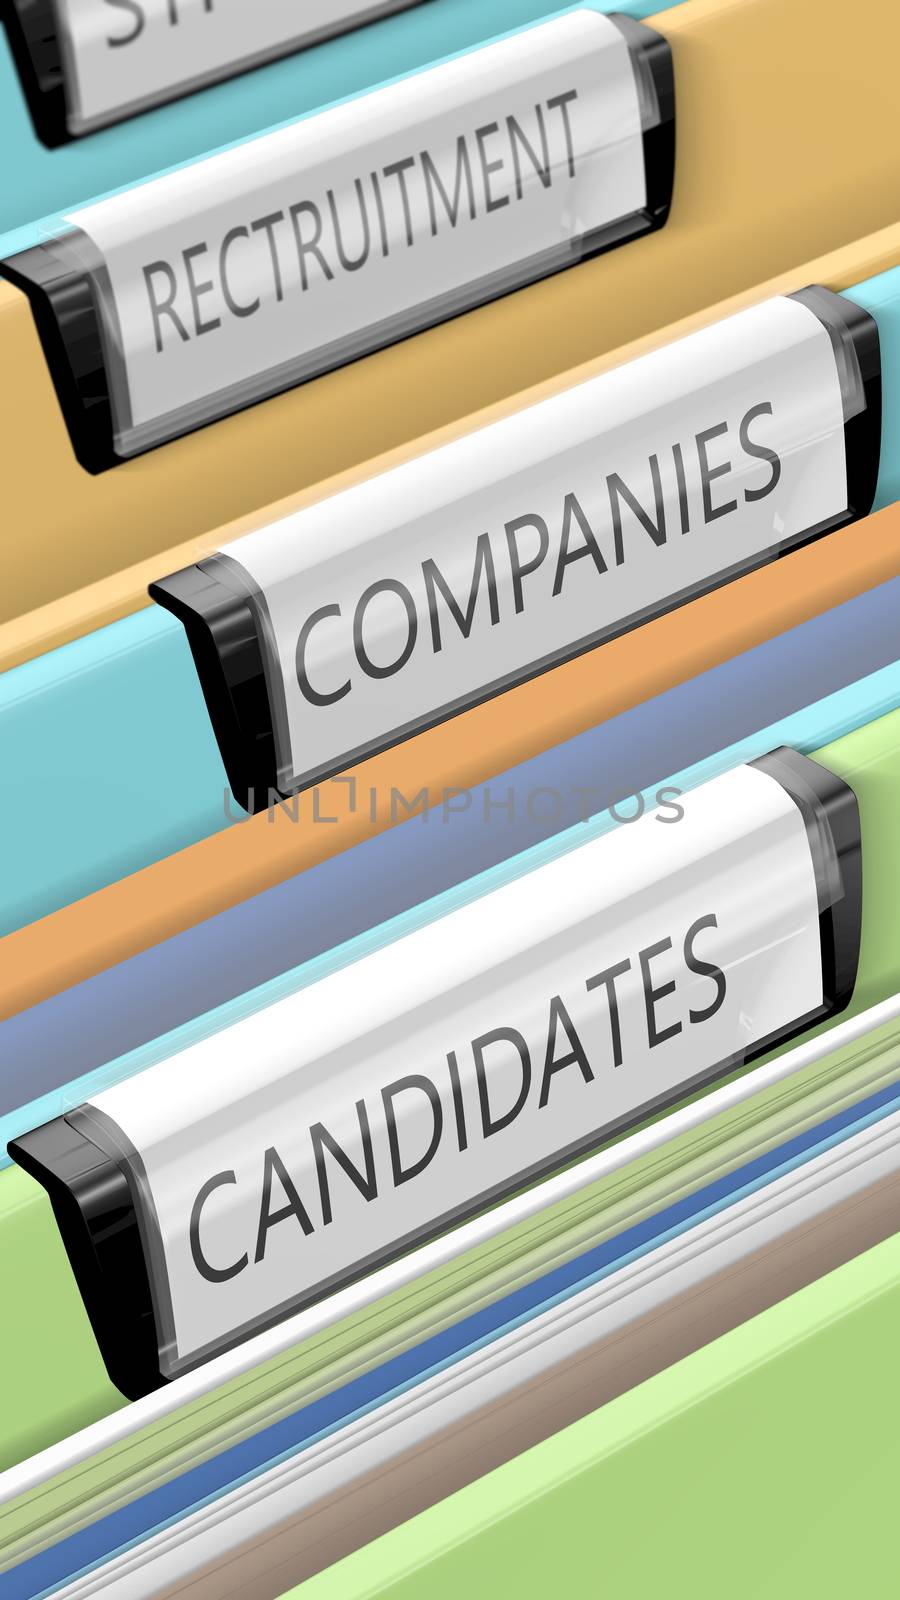 Files on candidates and company positions. Some enterprises. Many candidates. 3d render.